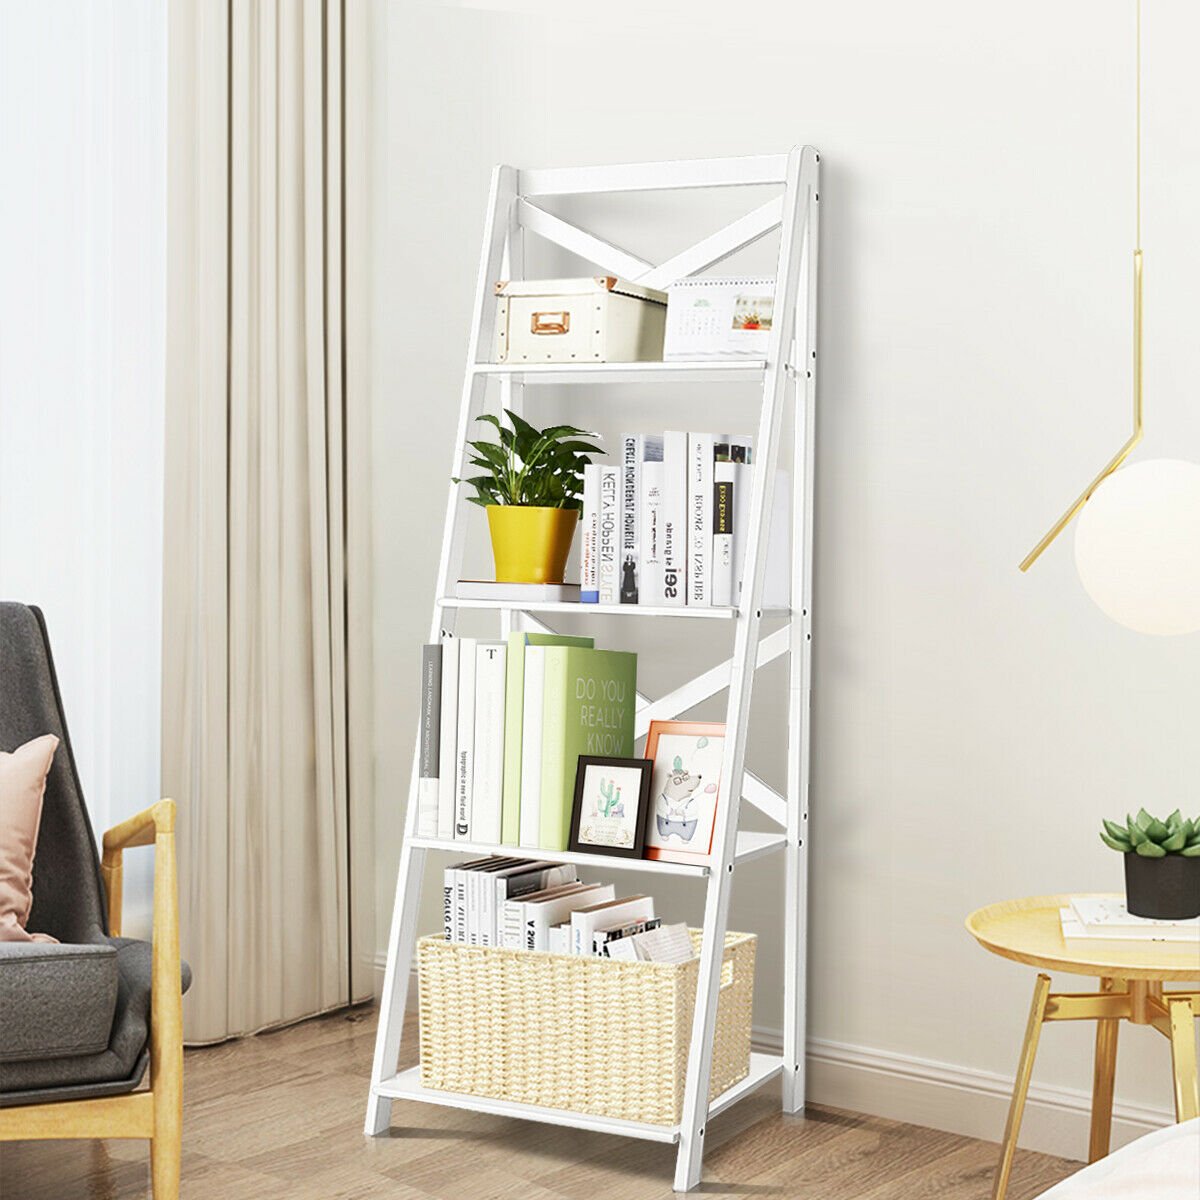 4-tier Leaning Free Standing Ladder Shelf Bookcase, White